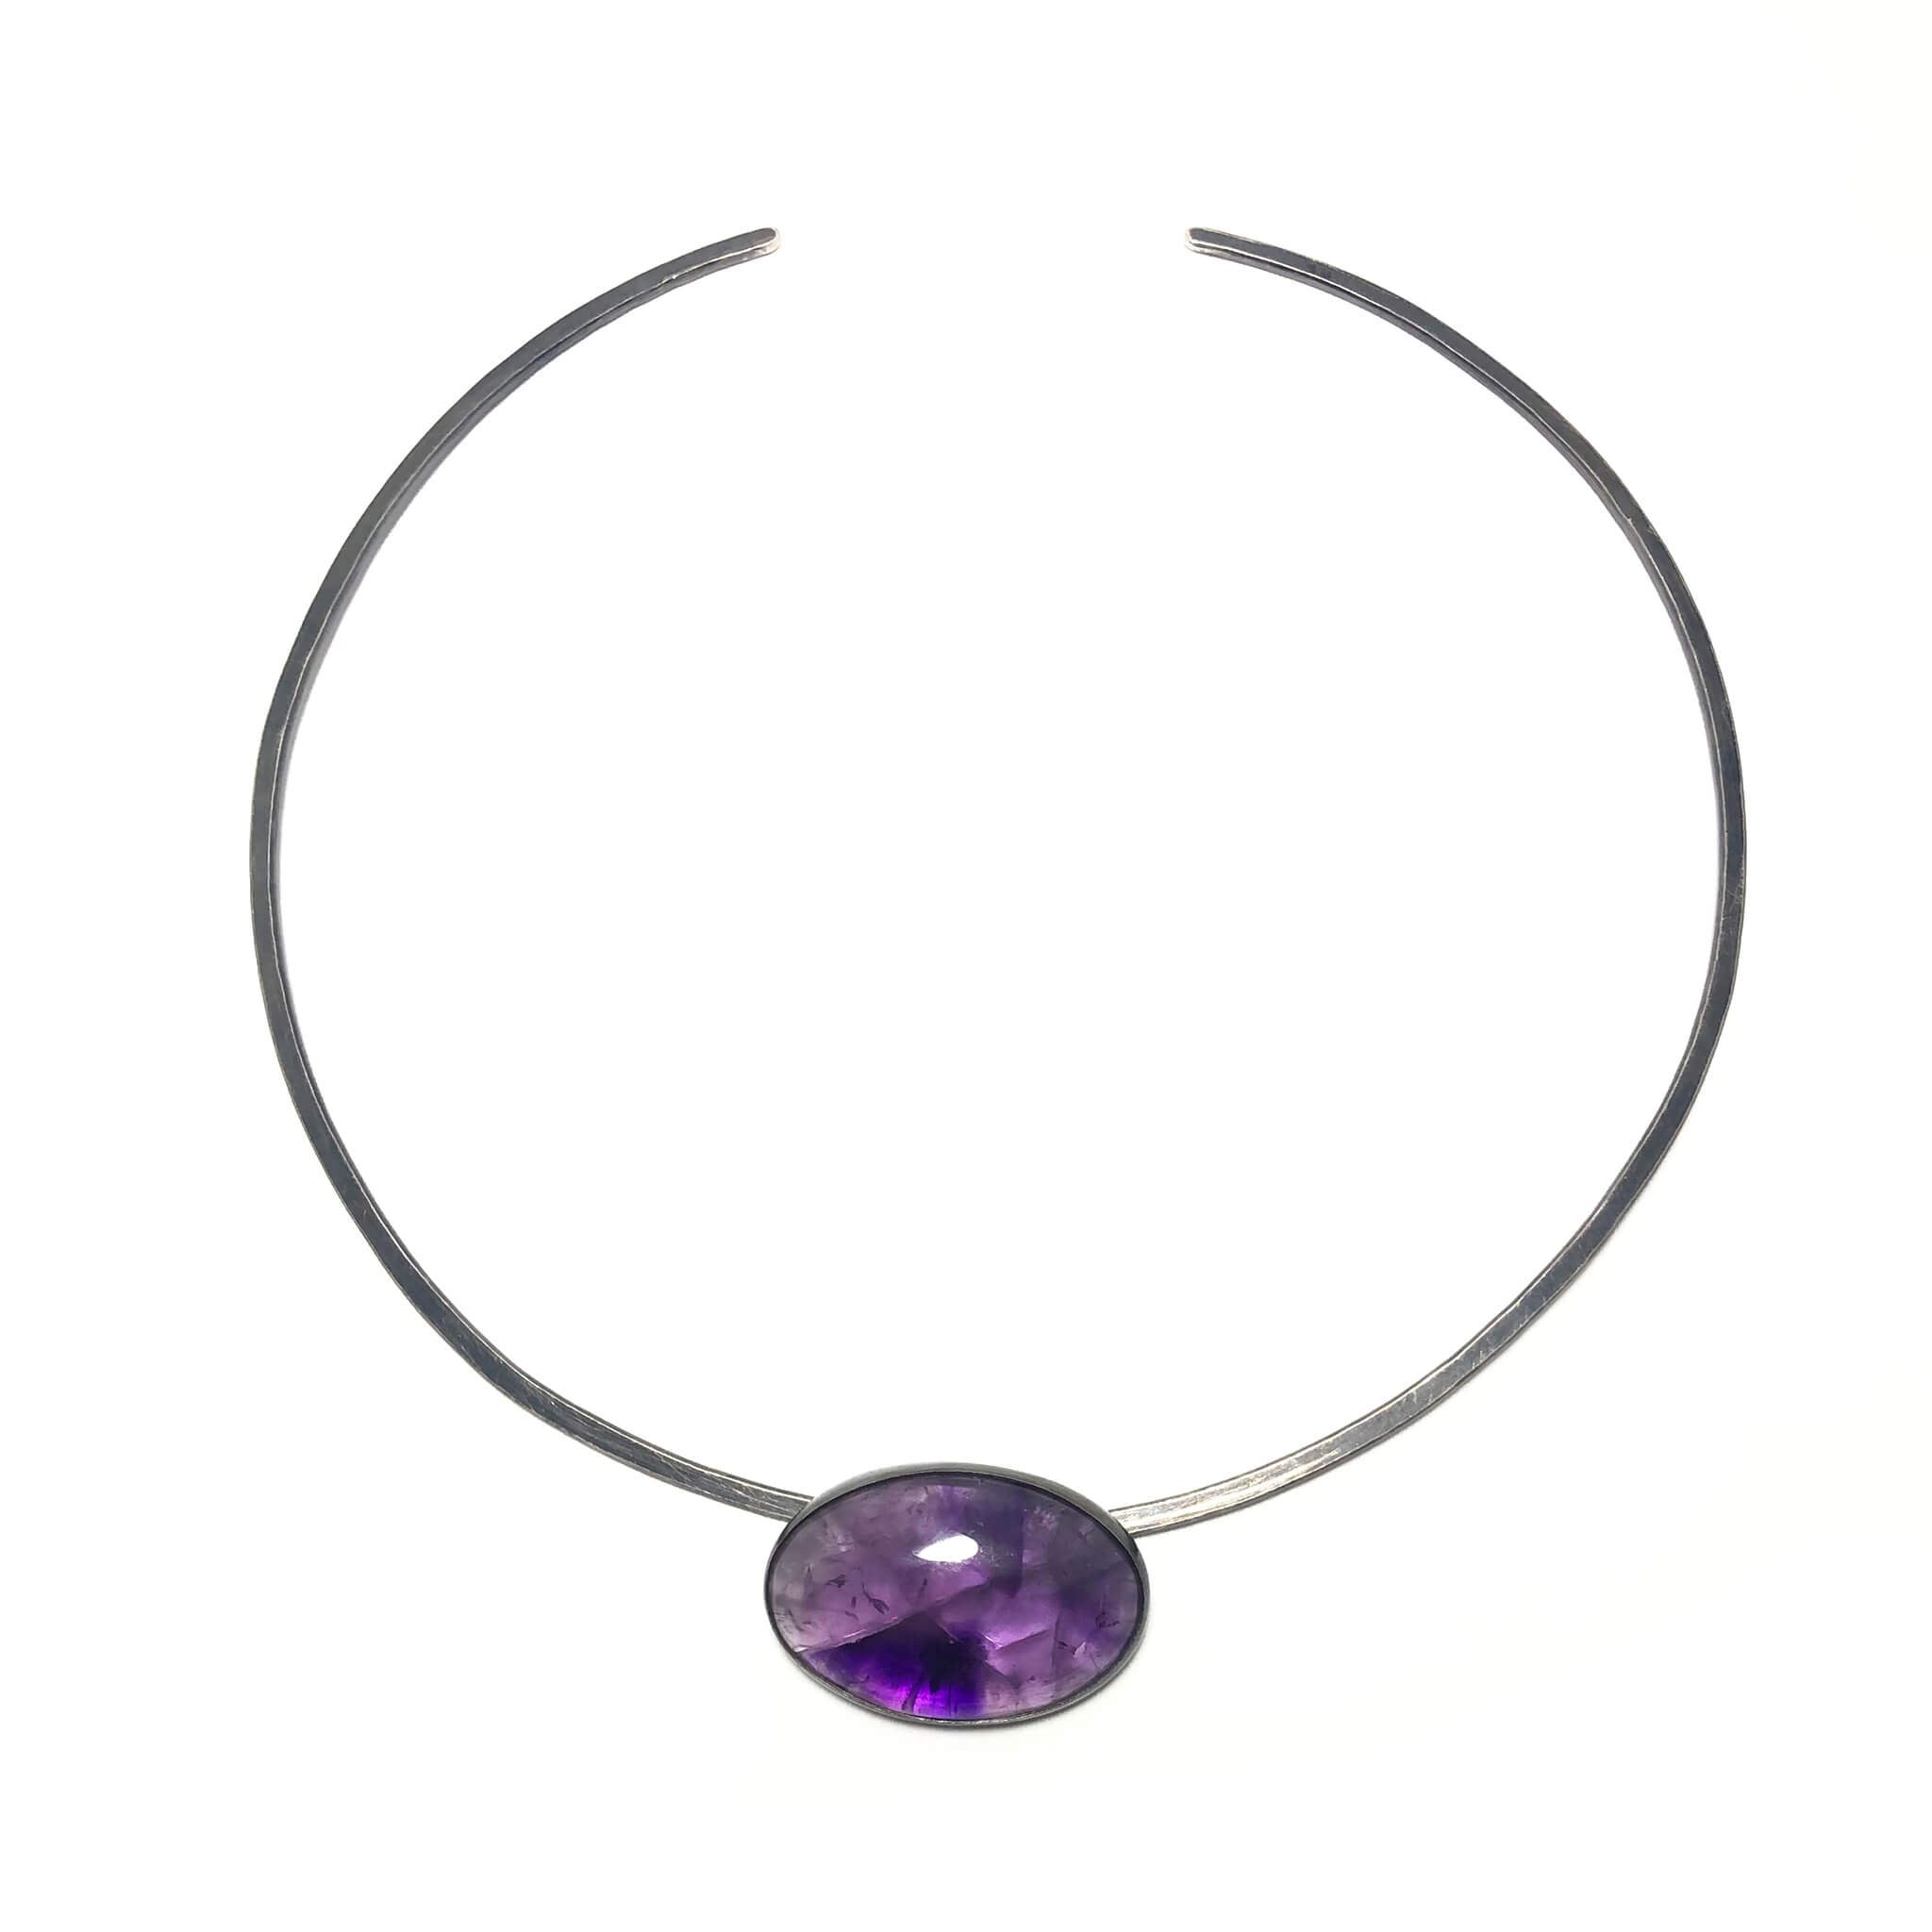 Amethyst Amulet Omega Necklace. Season of the Witch collection by Alex Lozier Jewelry.